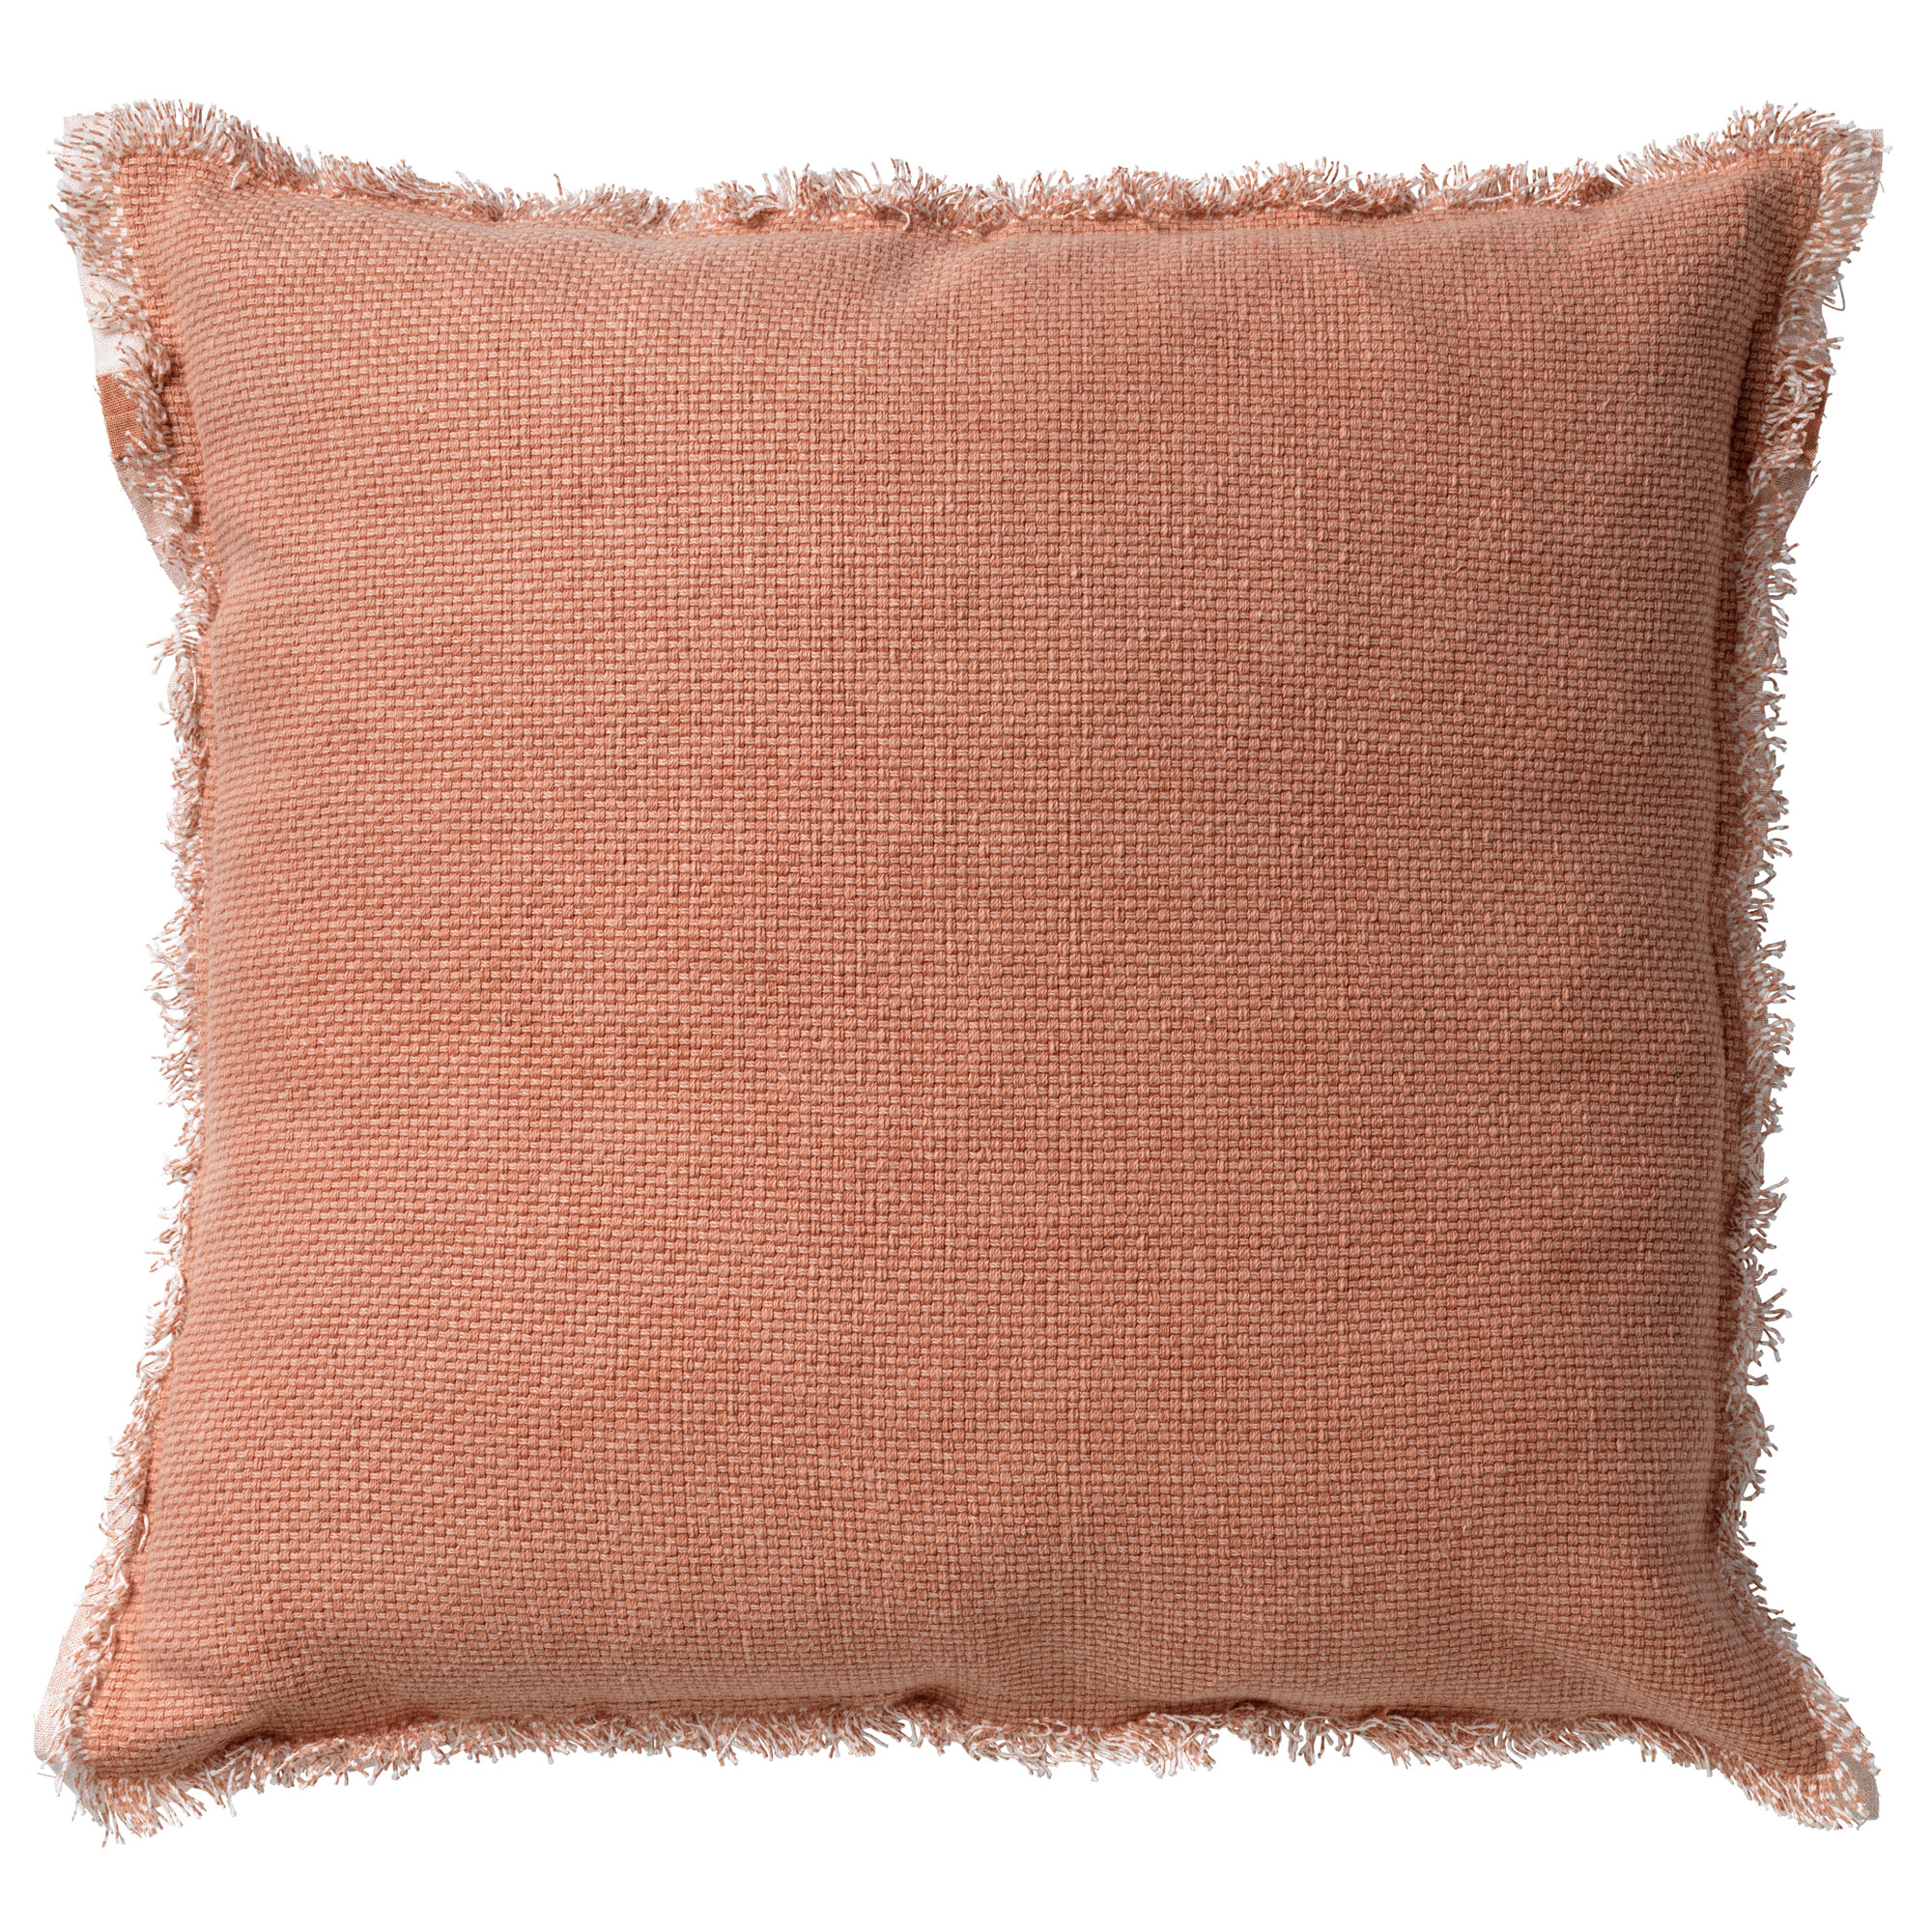 BURTO - Cushion cover 60x60 cm Muted Clay - pink